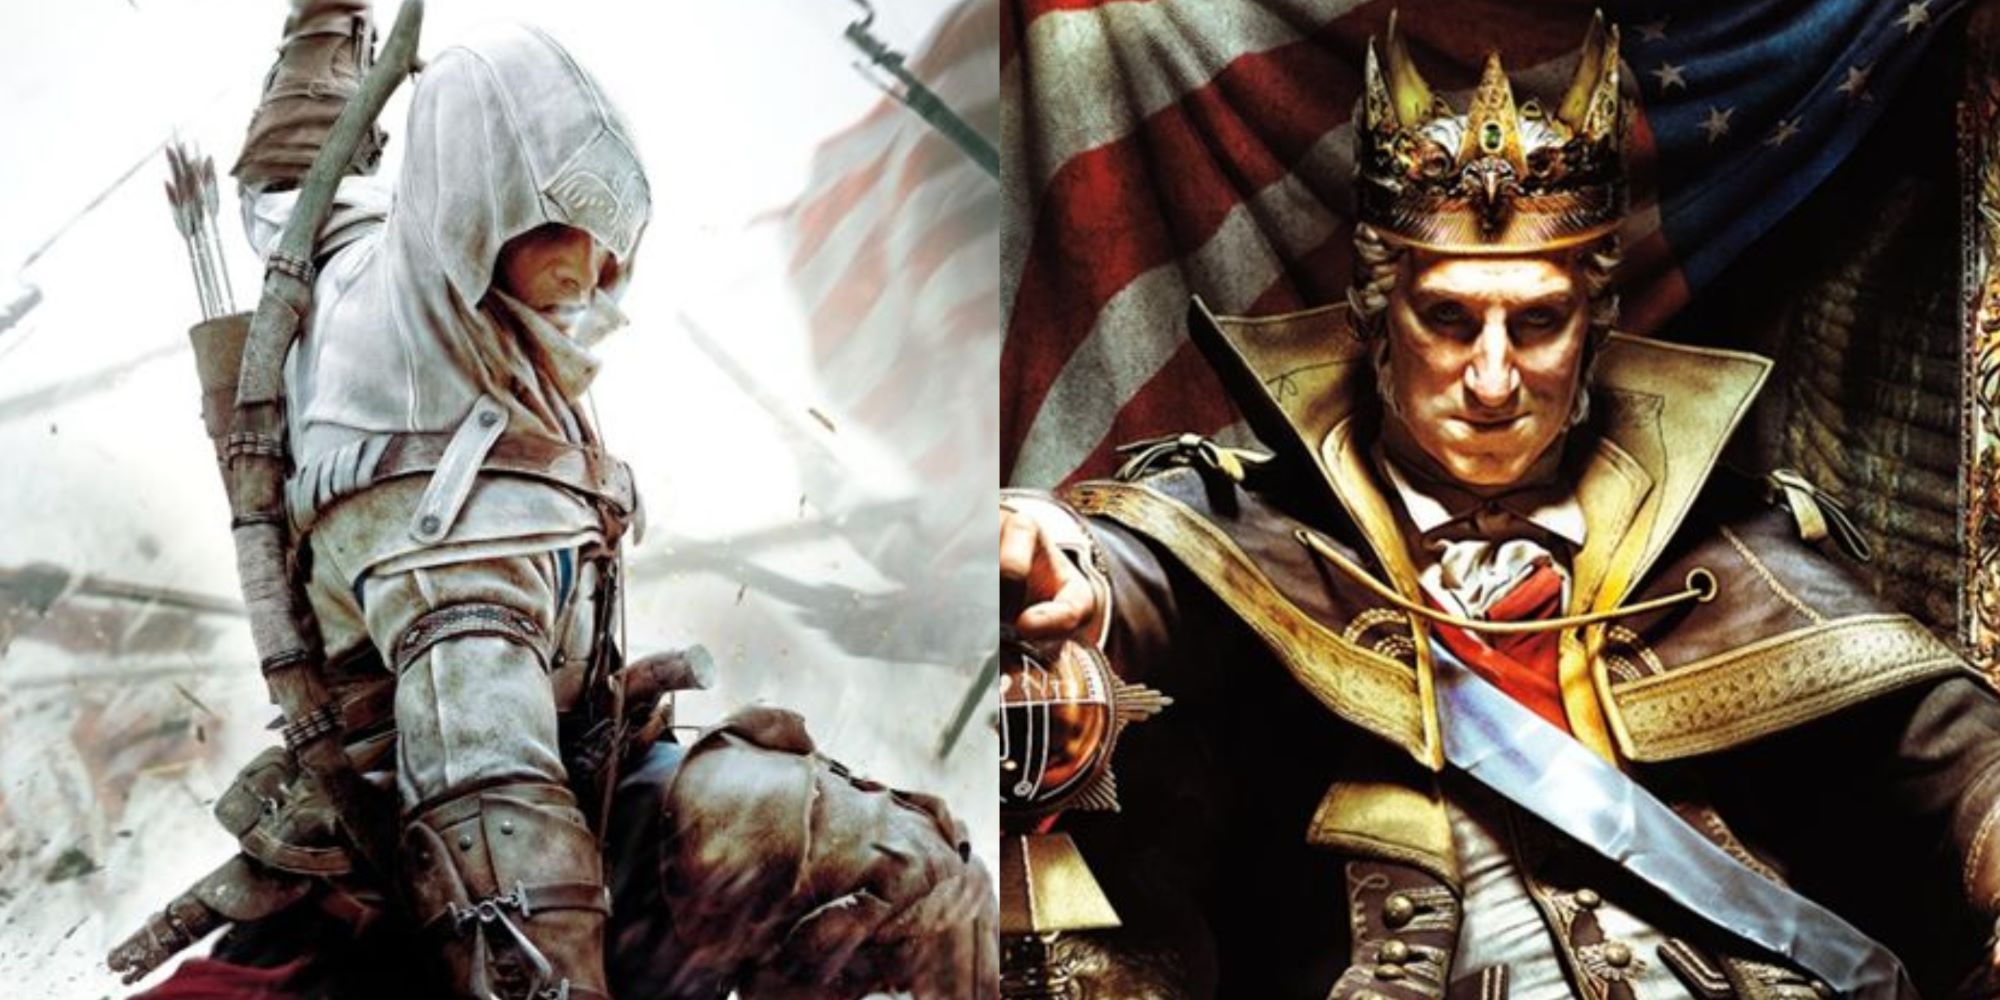 video game american revolution featuring assassins creed 3 cover art and the tyranny of king washington dlc cover art